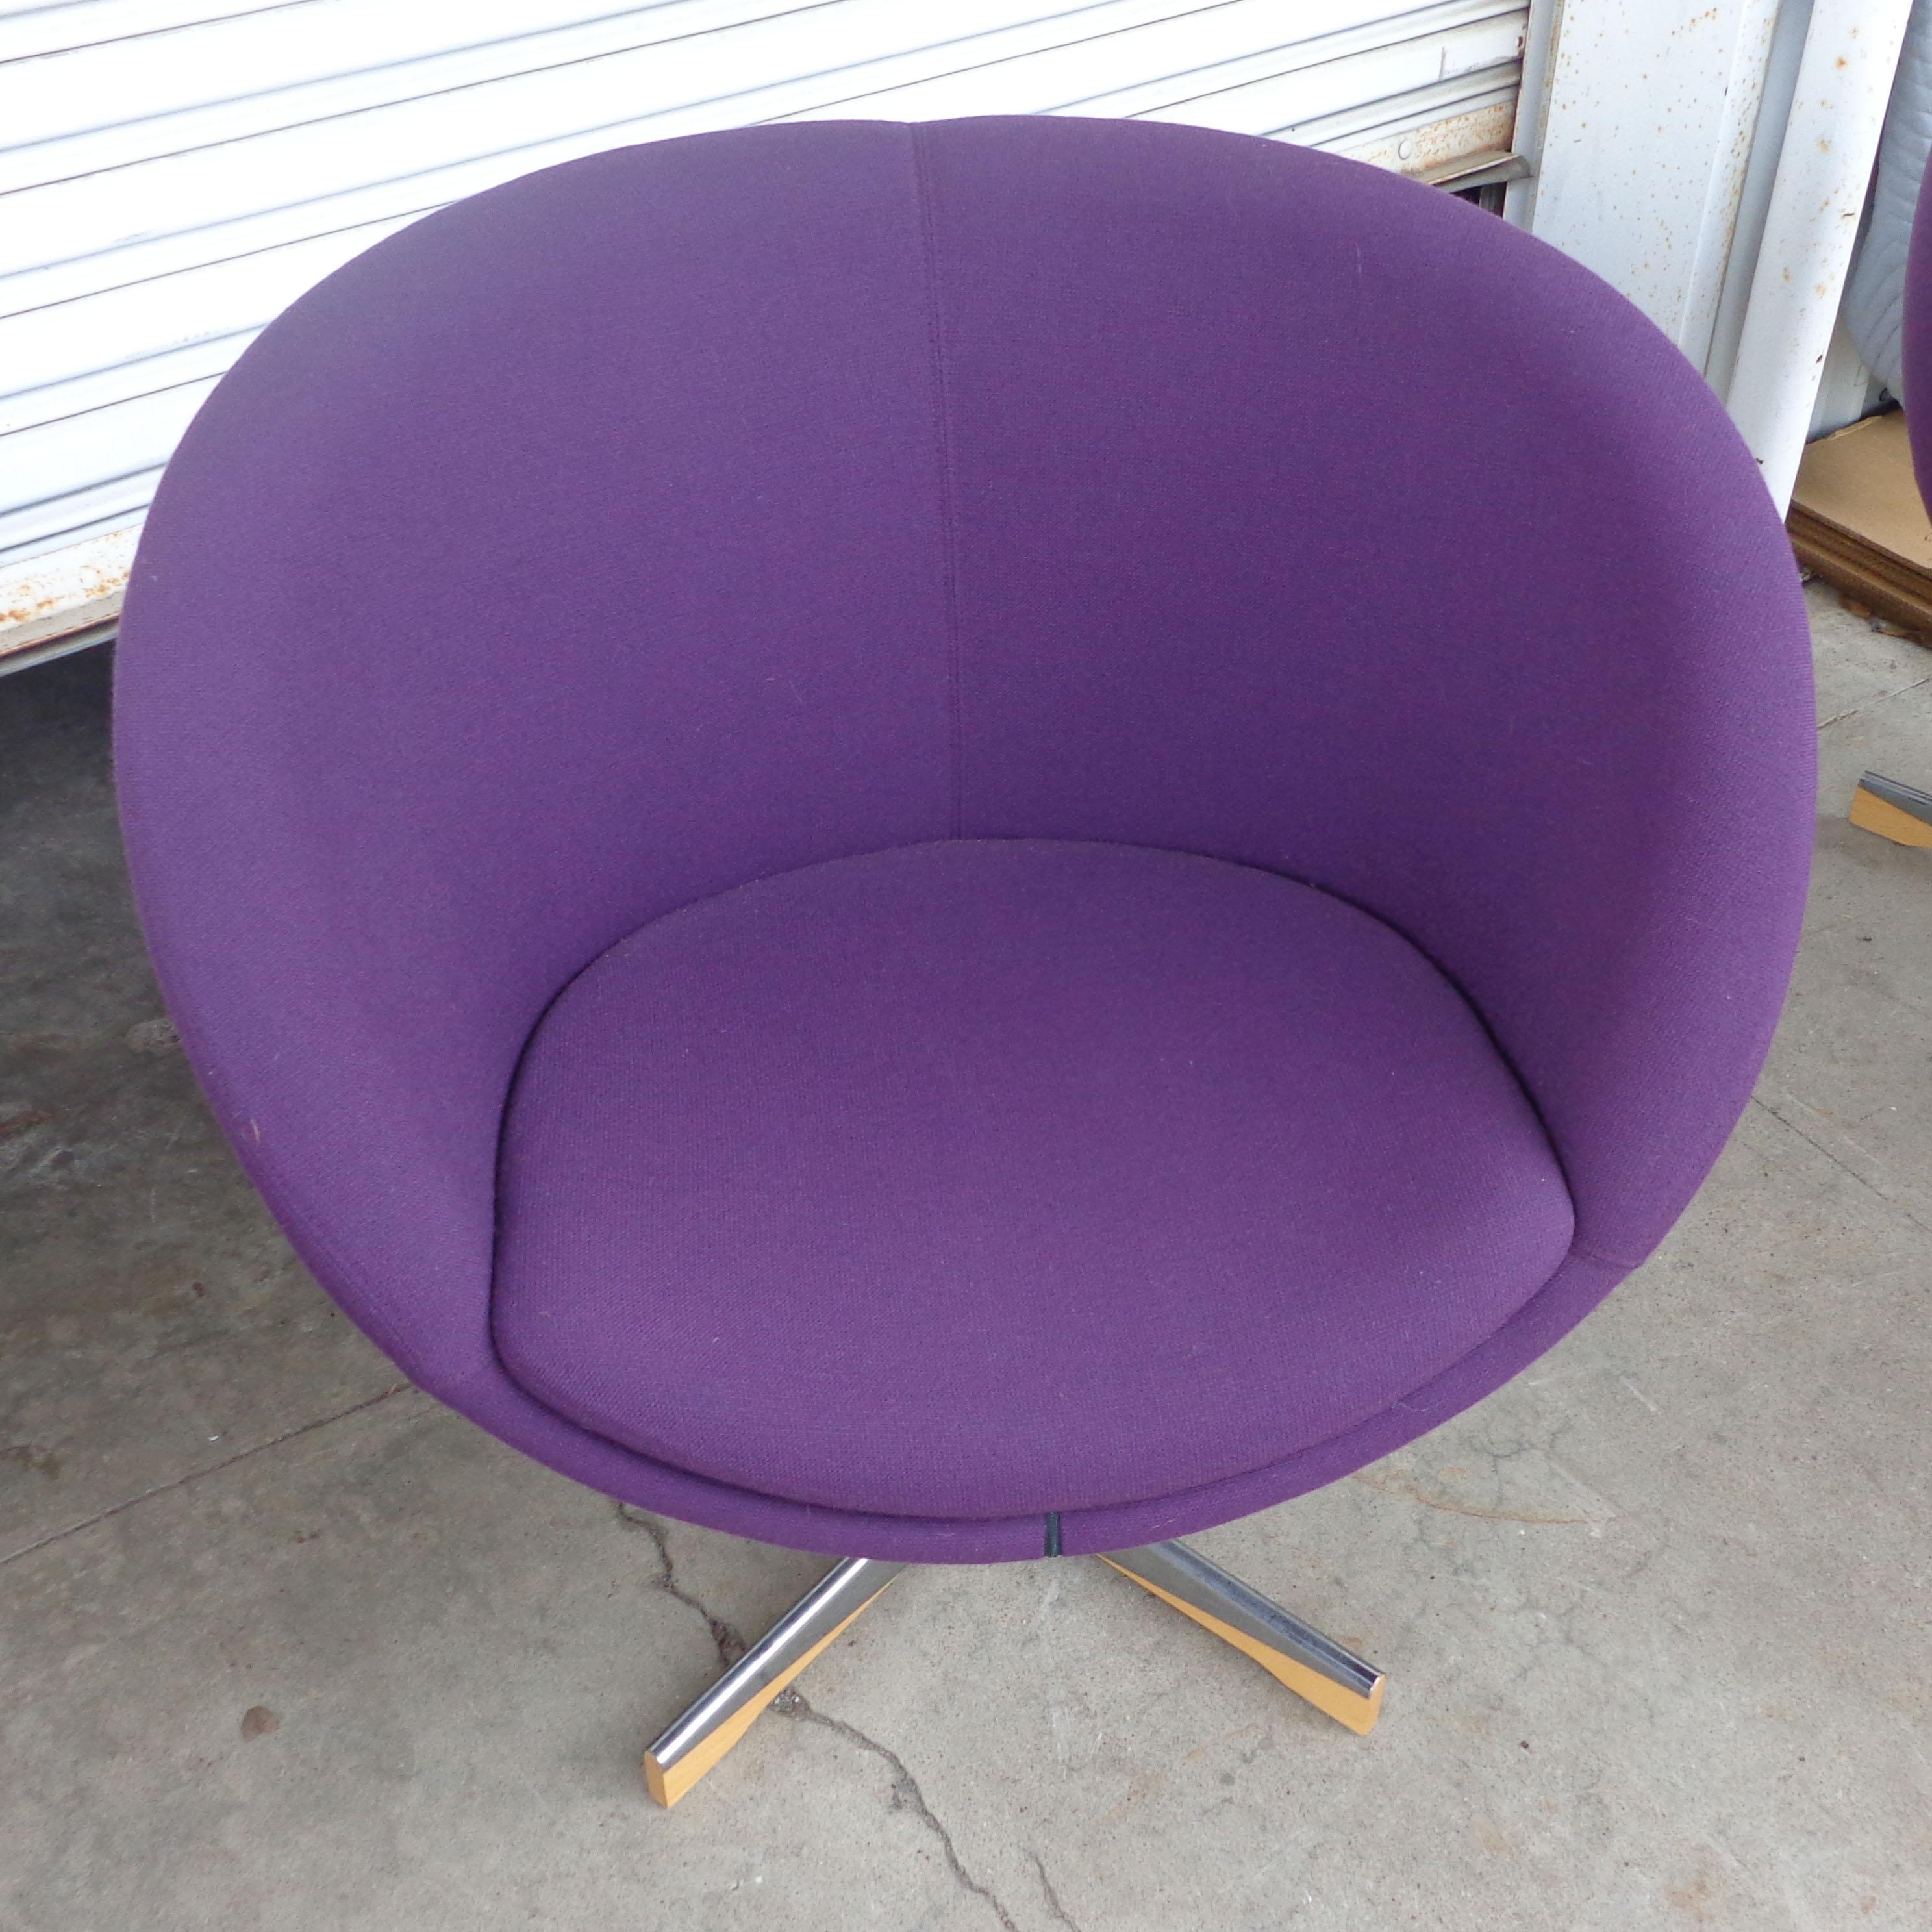 European 1 1960s Planet Chair by Sven Ivar Dysthe for Fora Form For Sale